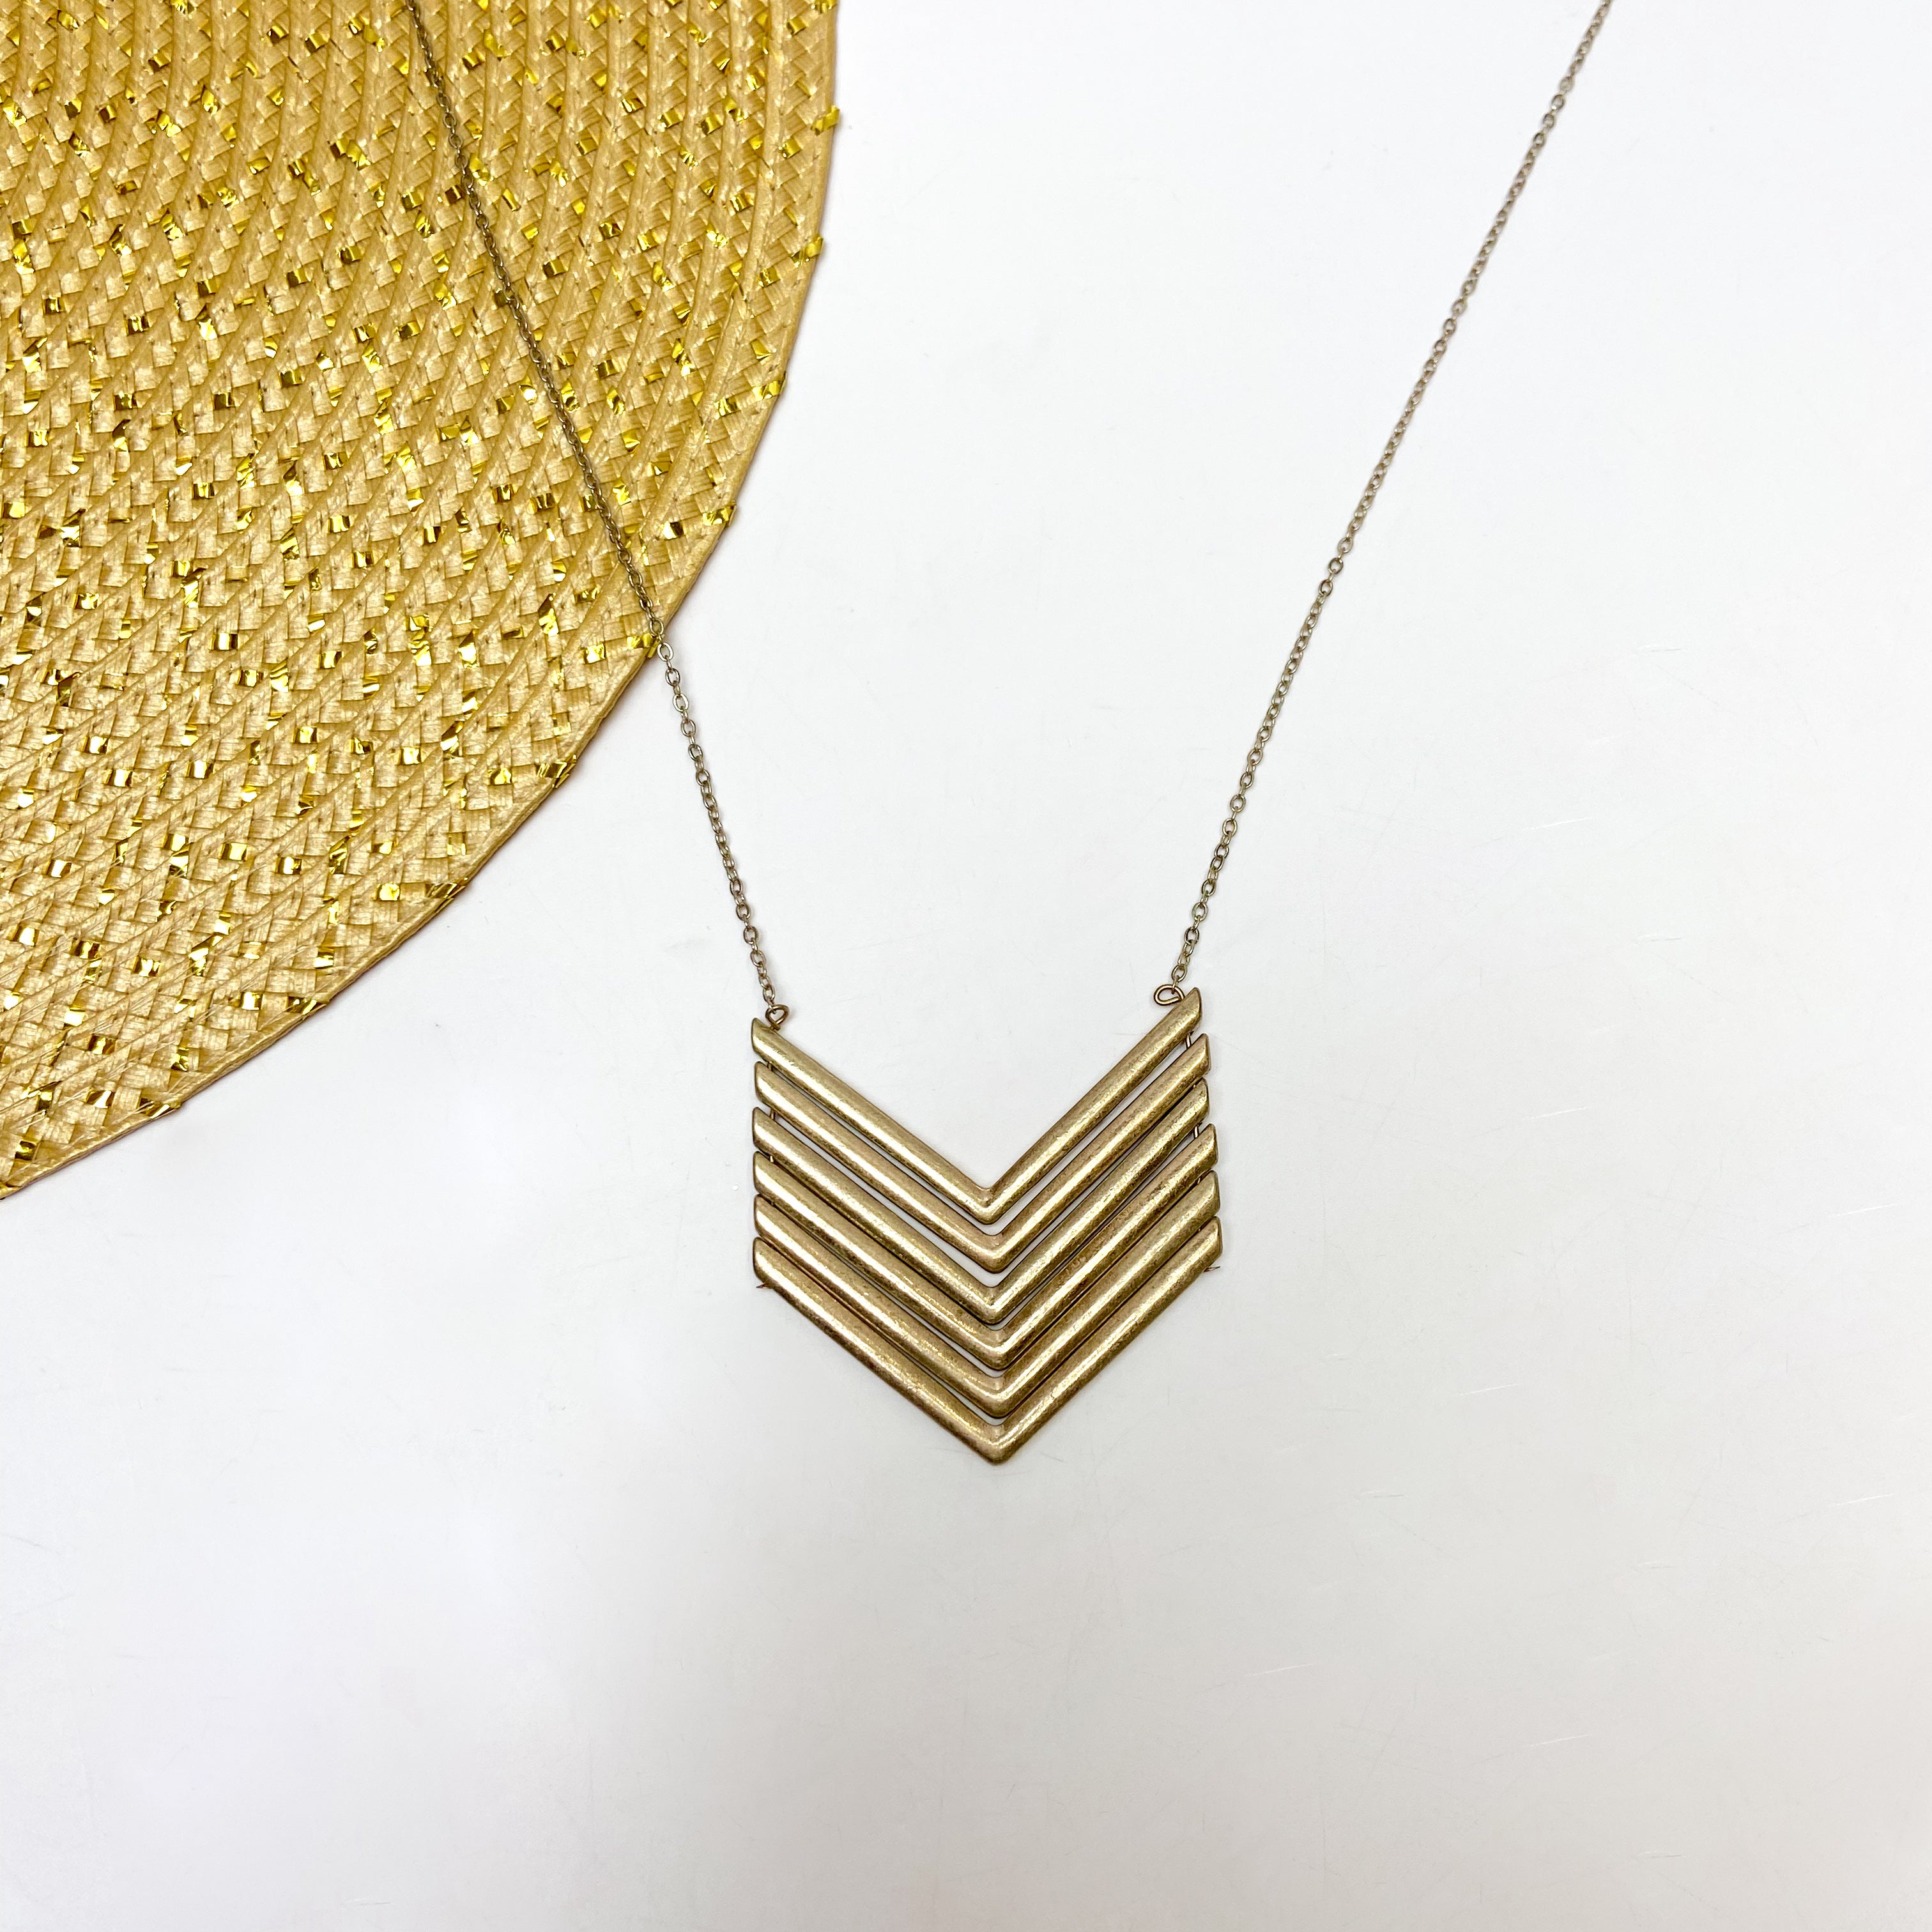 Long Gold Tone Necklace with Chevron Pendant